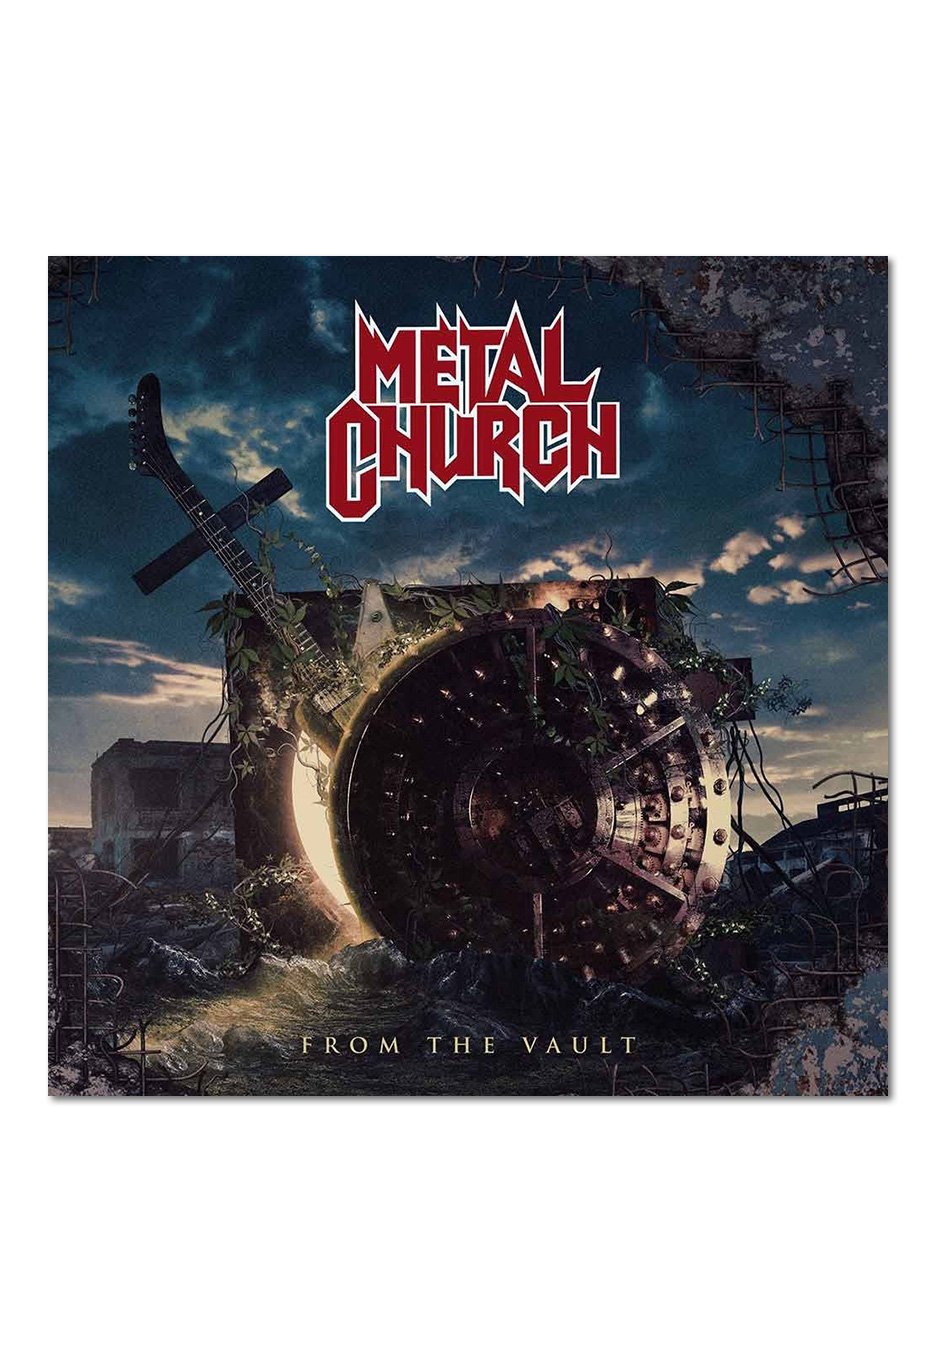 Metal Church - From The Vault - CD